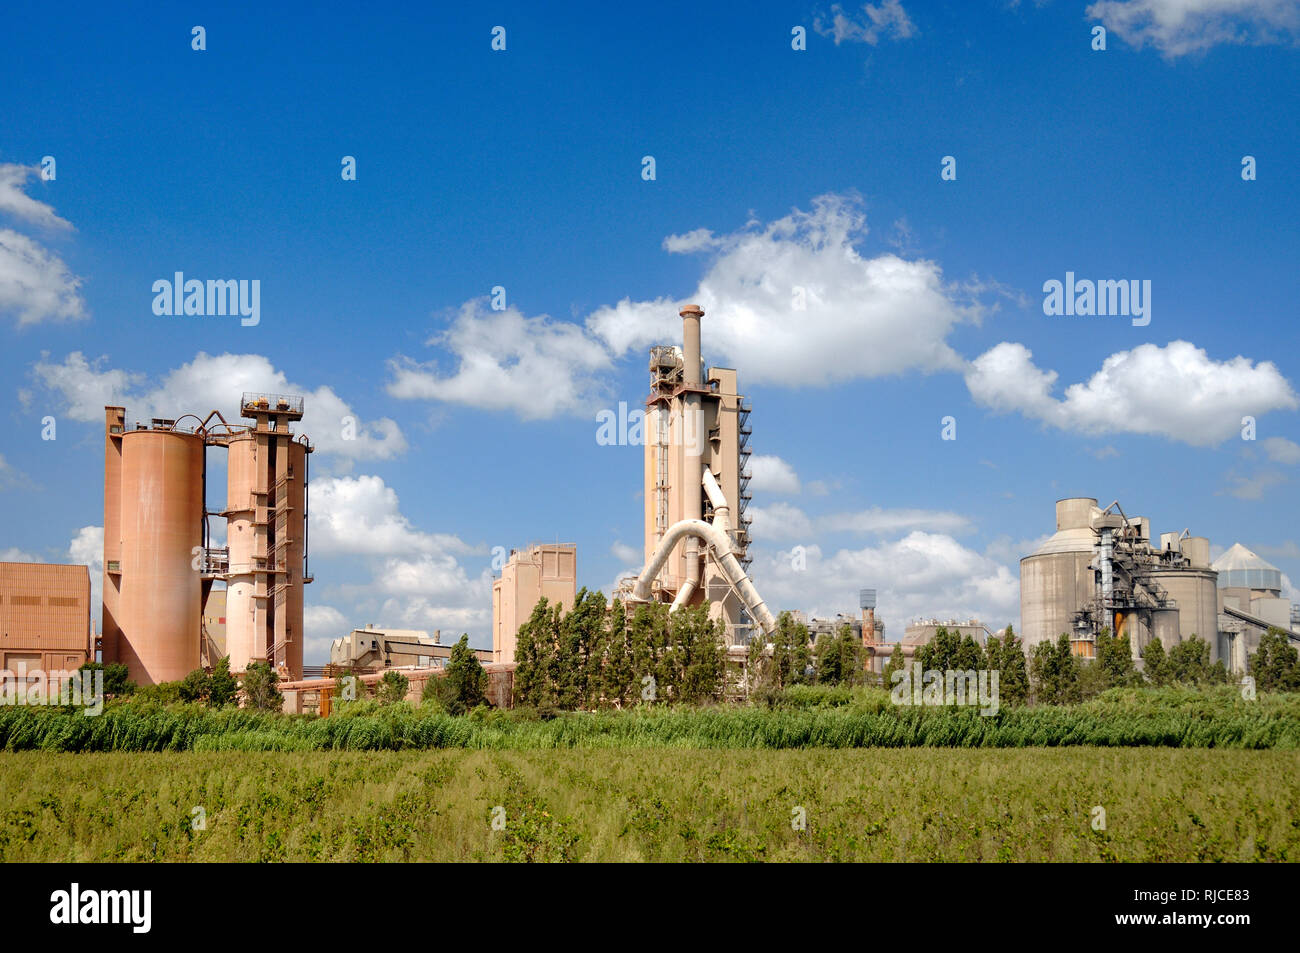 Cement Works, Cement Mill, Cement Factory, Cement Kiln or Concrete Factory or Industrial Architecture Beaucaire Provence France Stock Photo